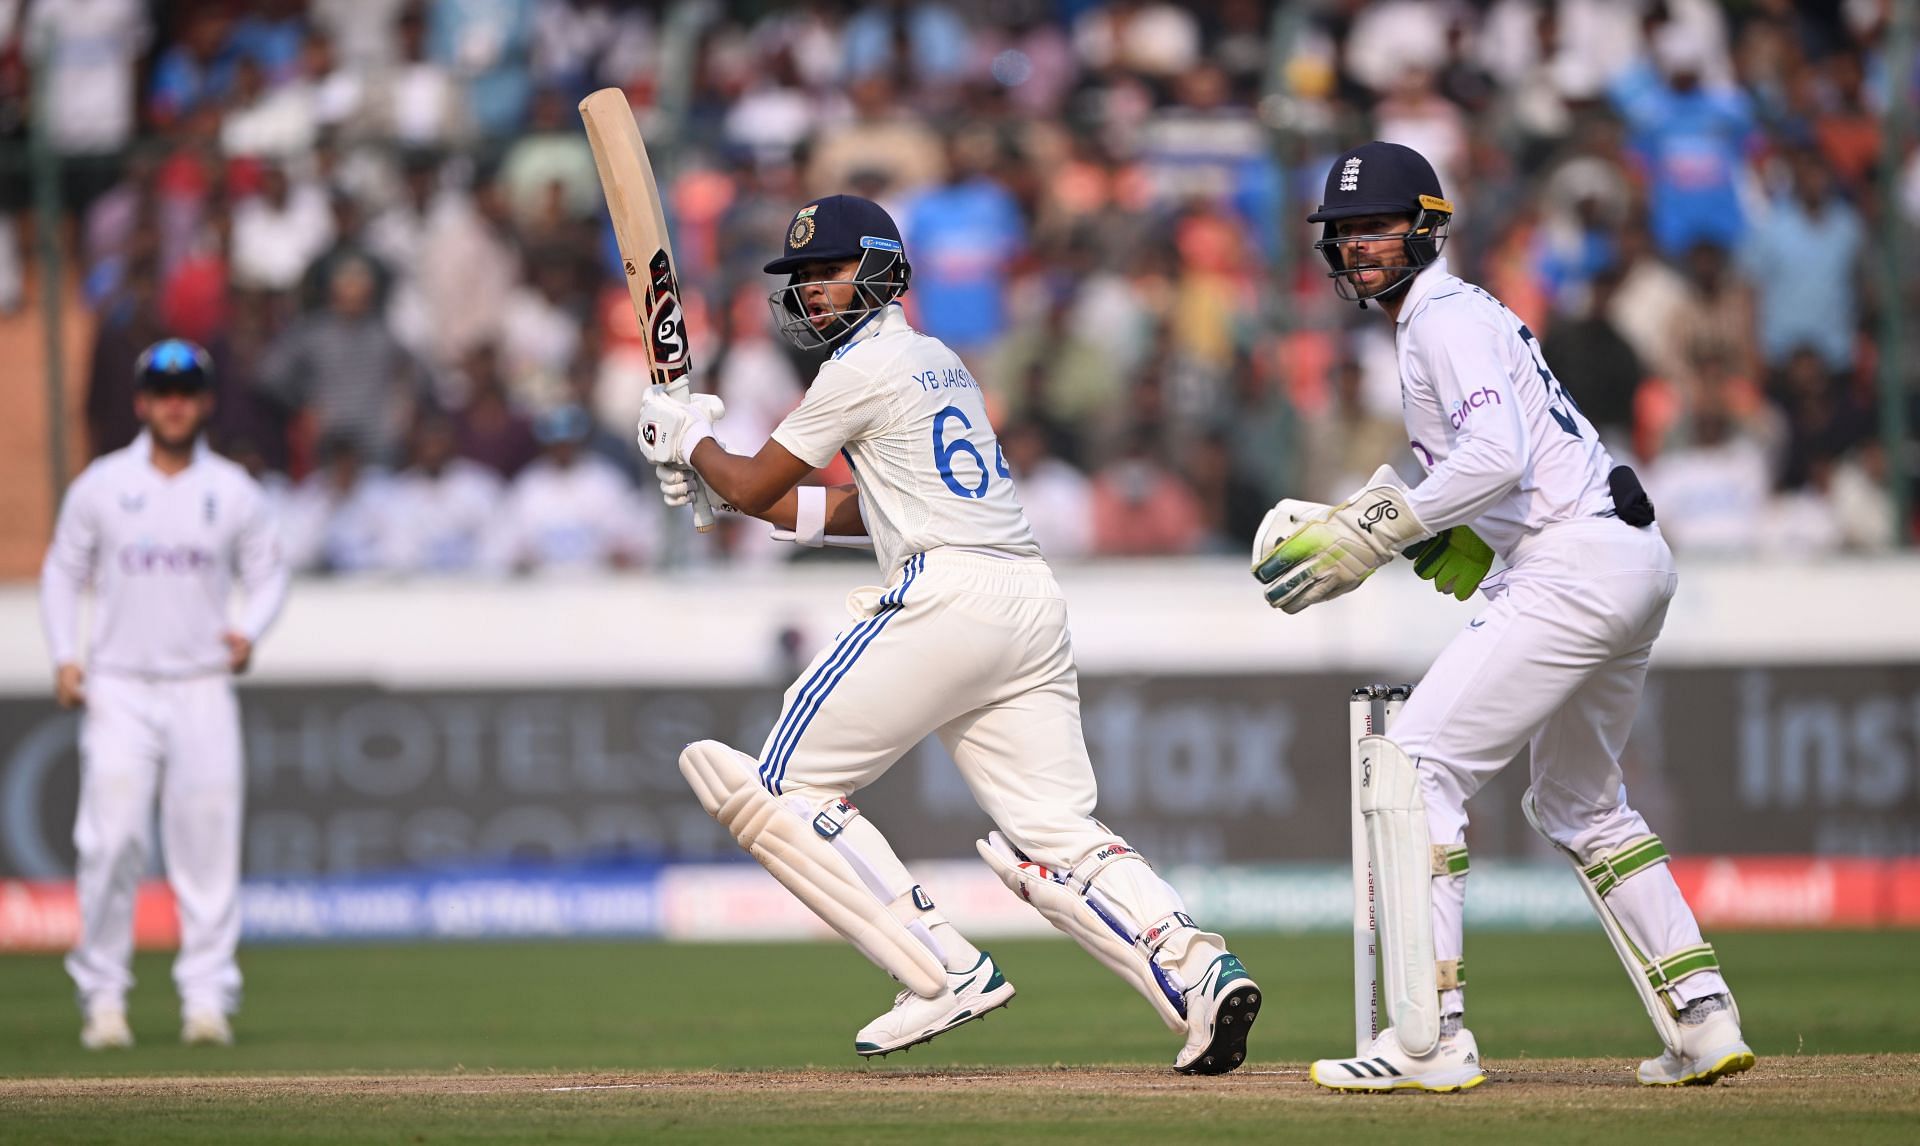 India  v England - 1st Test Match: Day One